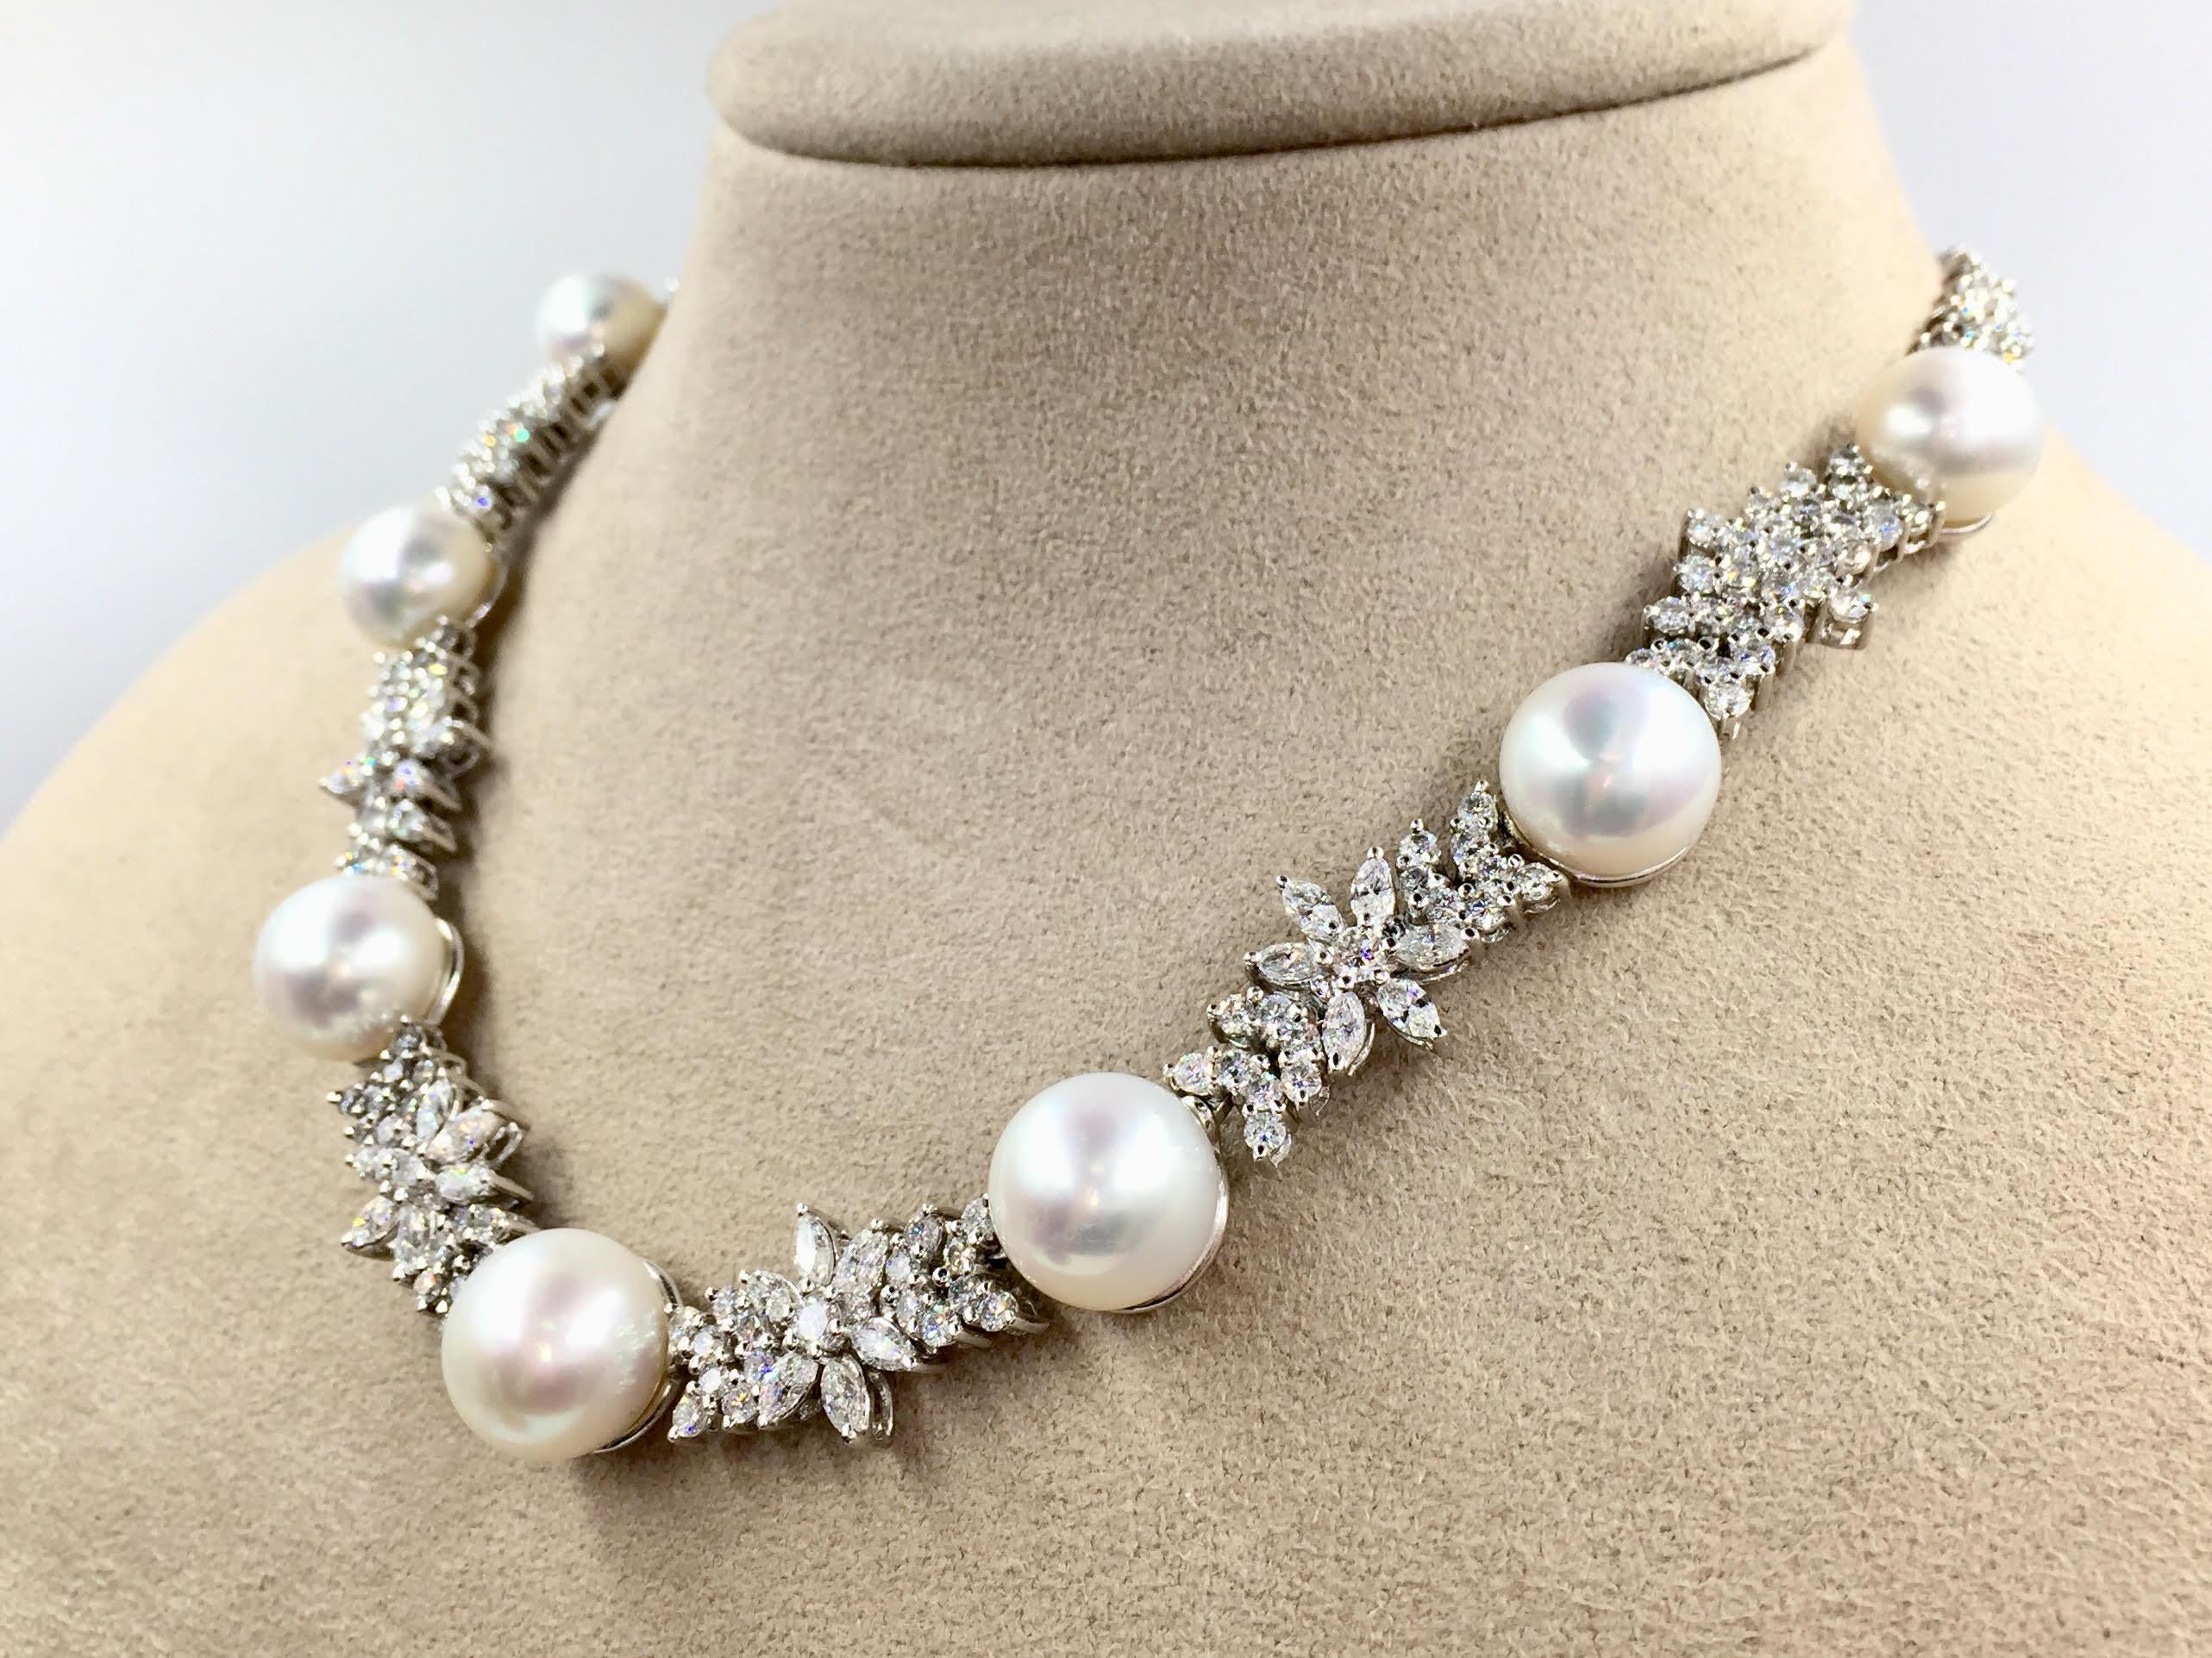 A truly immaculate find. This gorgeous platinum necklace features 13.98 carats of round brilliant diamonds and 2.78 carats of marquise brilliant diamonds. Diamond quality is approximately G color, VS2/SI1 clarity. Seven white, lustrous and slightly